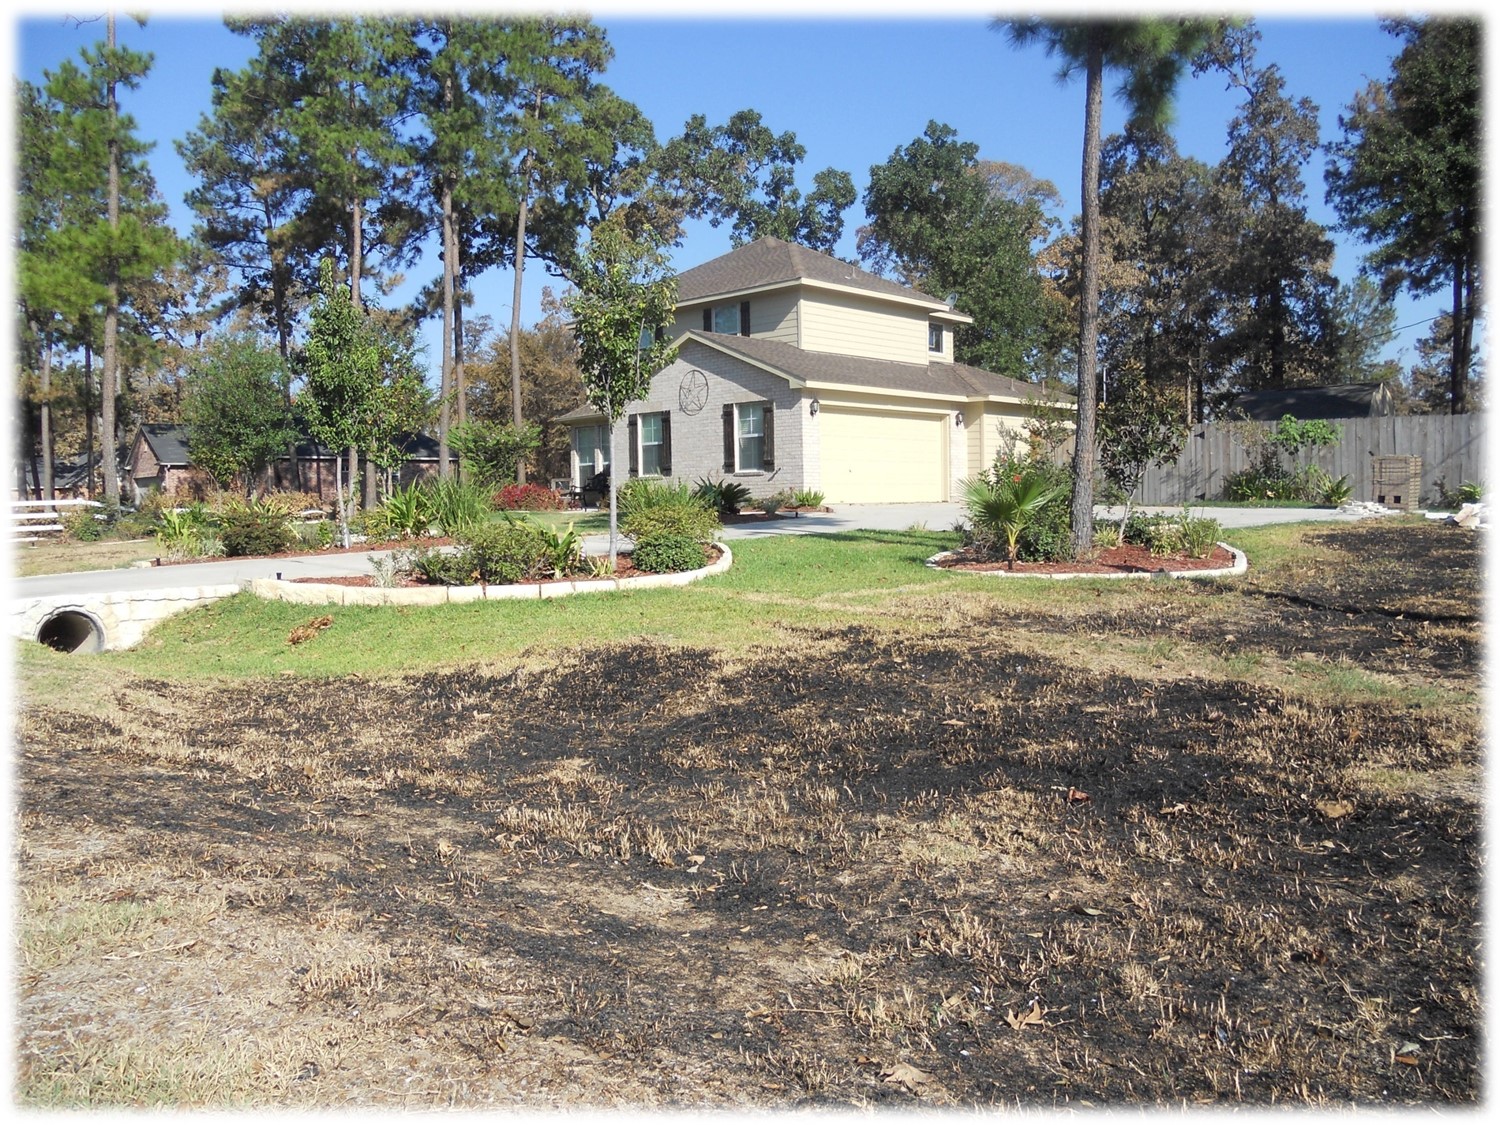 Landscaping to help protect from wildfires